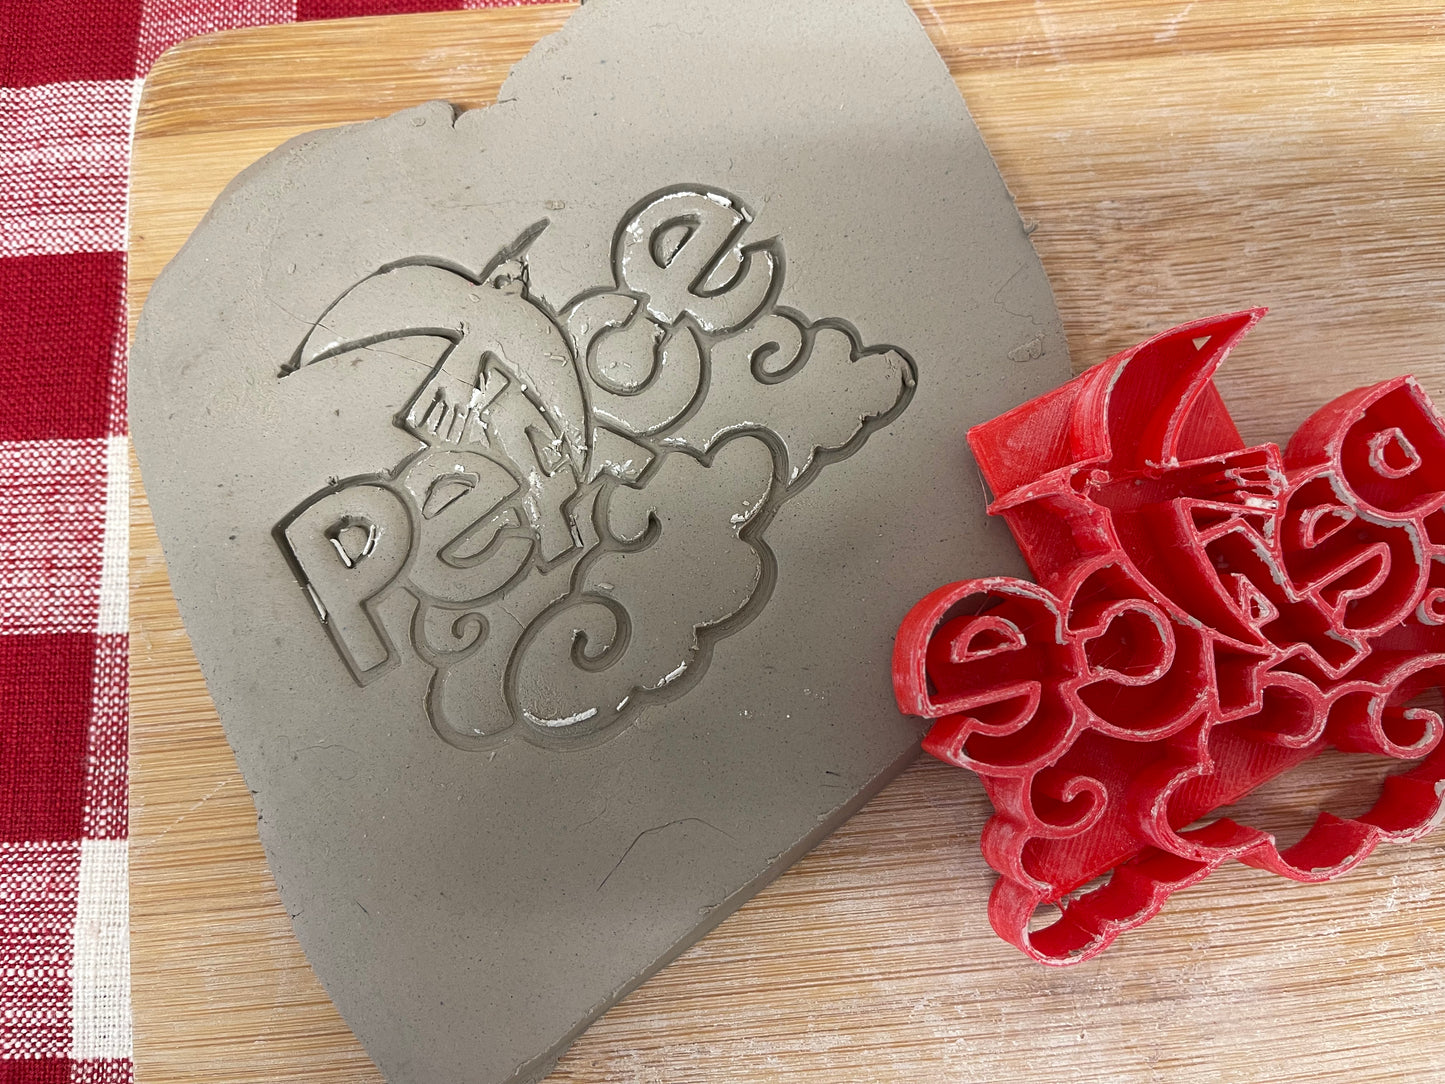 "Peace" word with Dove stamp - plastic 3d printed, multiple sizes available